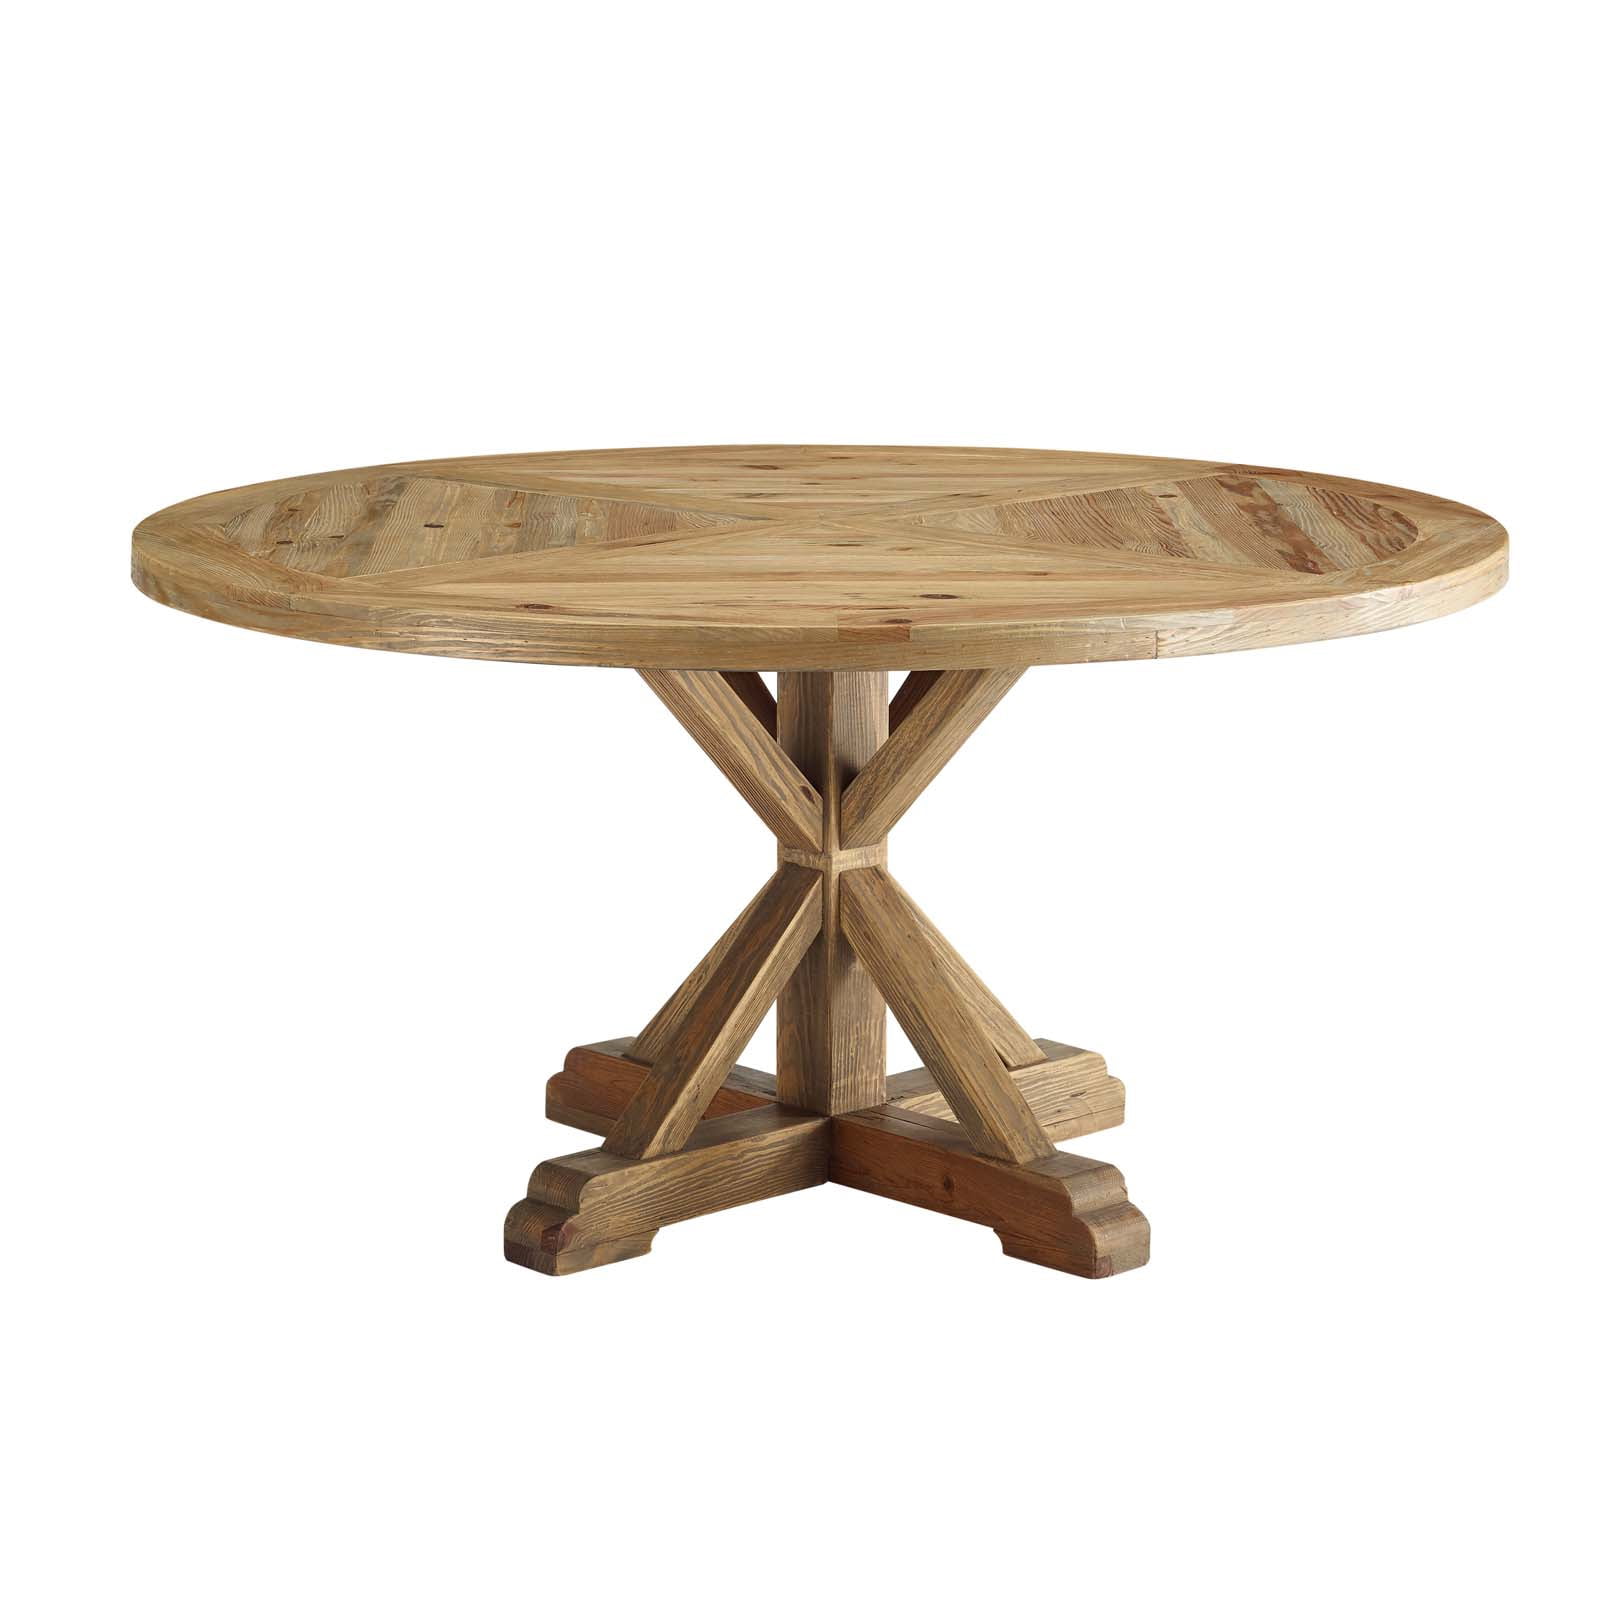 59" Round Pine Wood Dining Table with Carved Pedestal Base, Brown